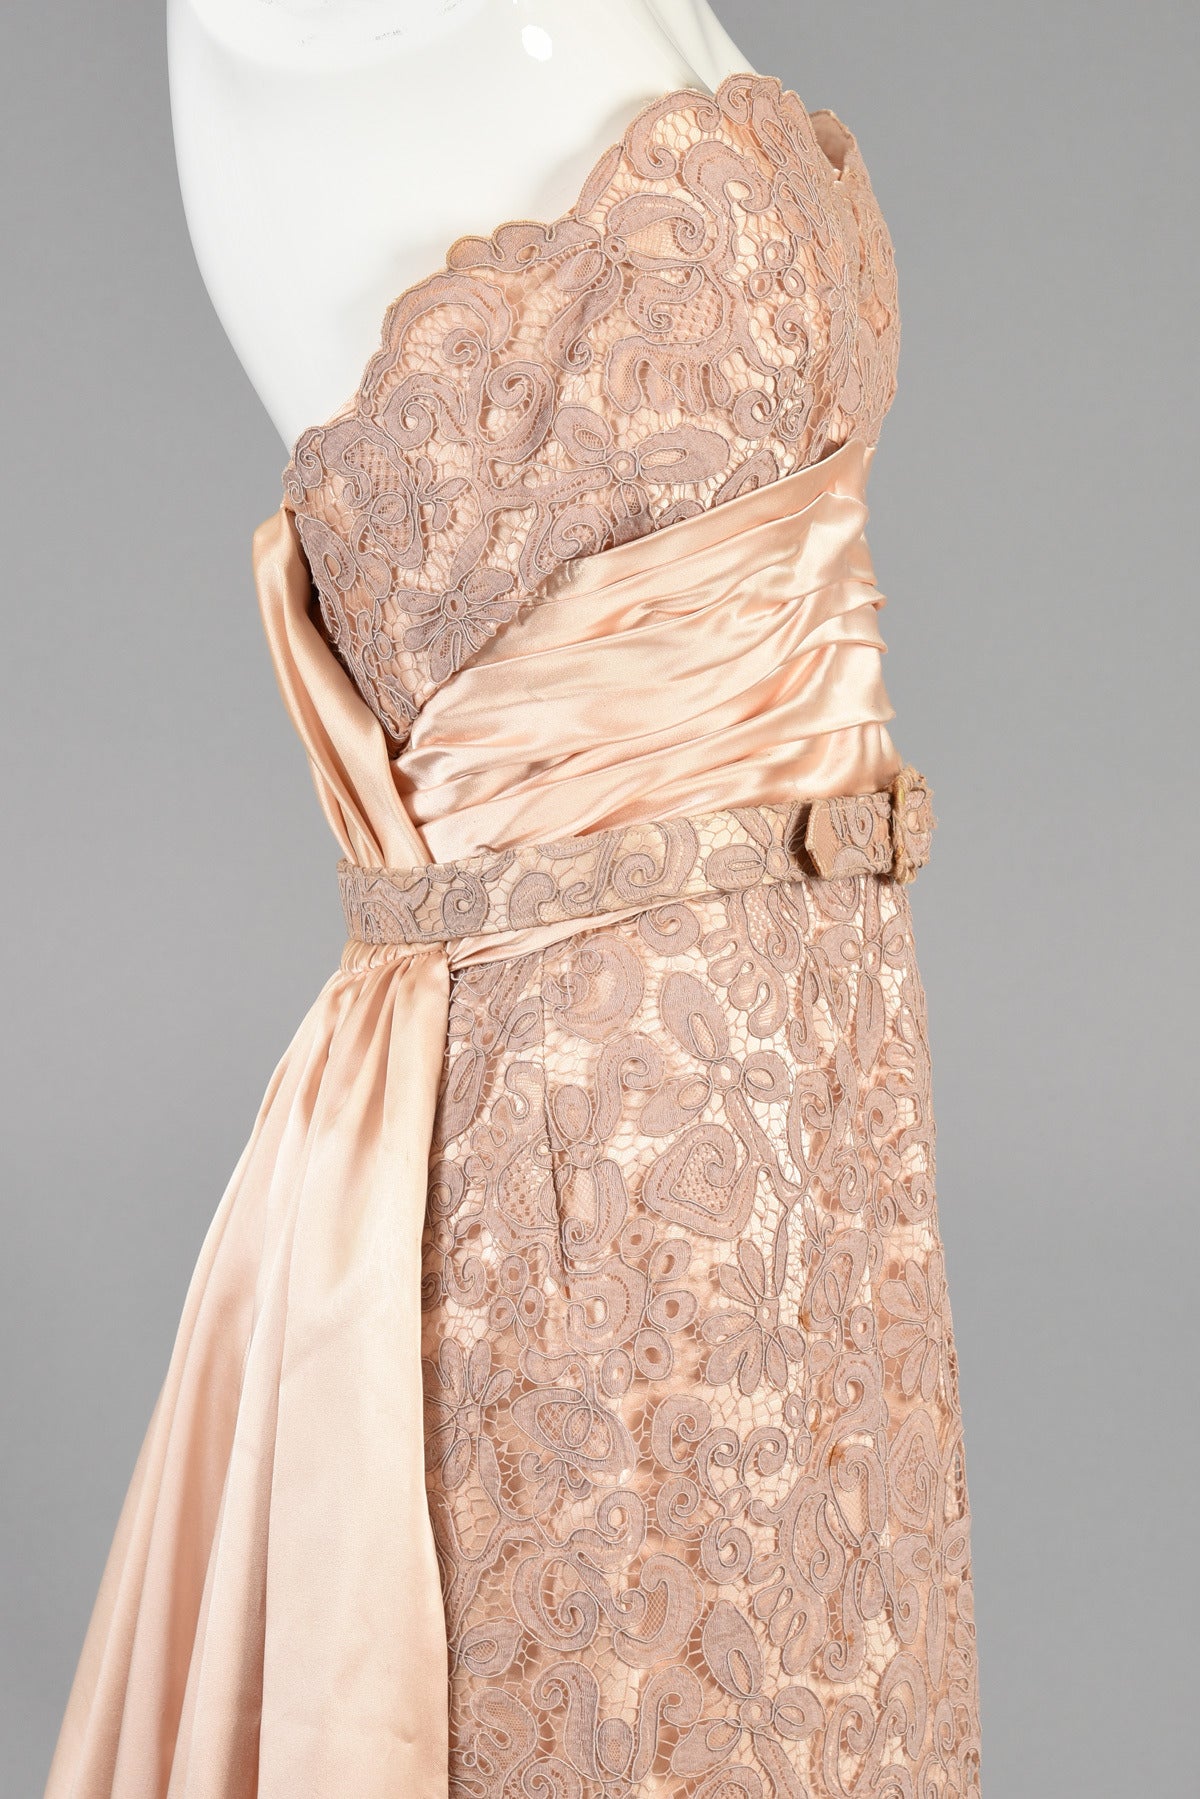 Circa 1952 Pierre Balmain Demi Couture Lace Evening Gown with Train For Sale 1